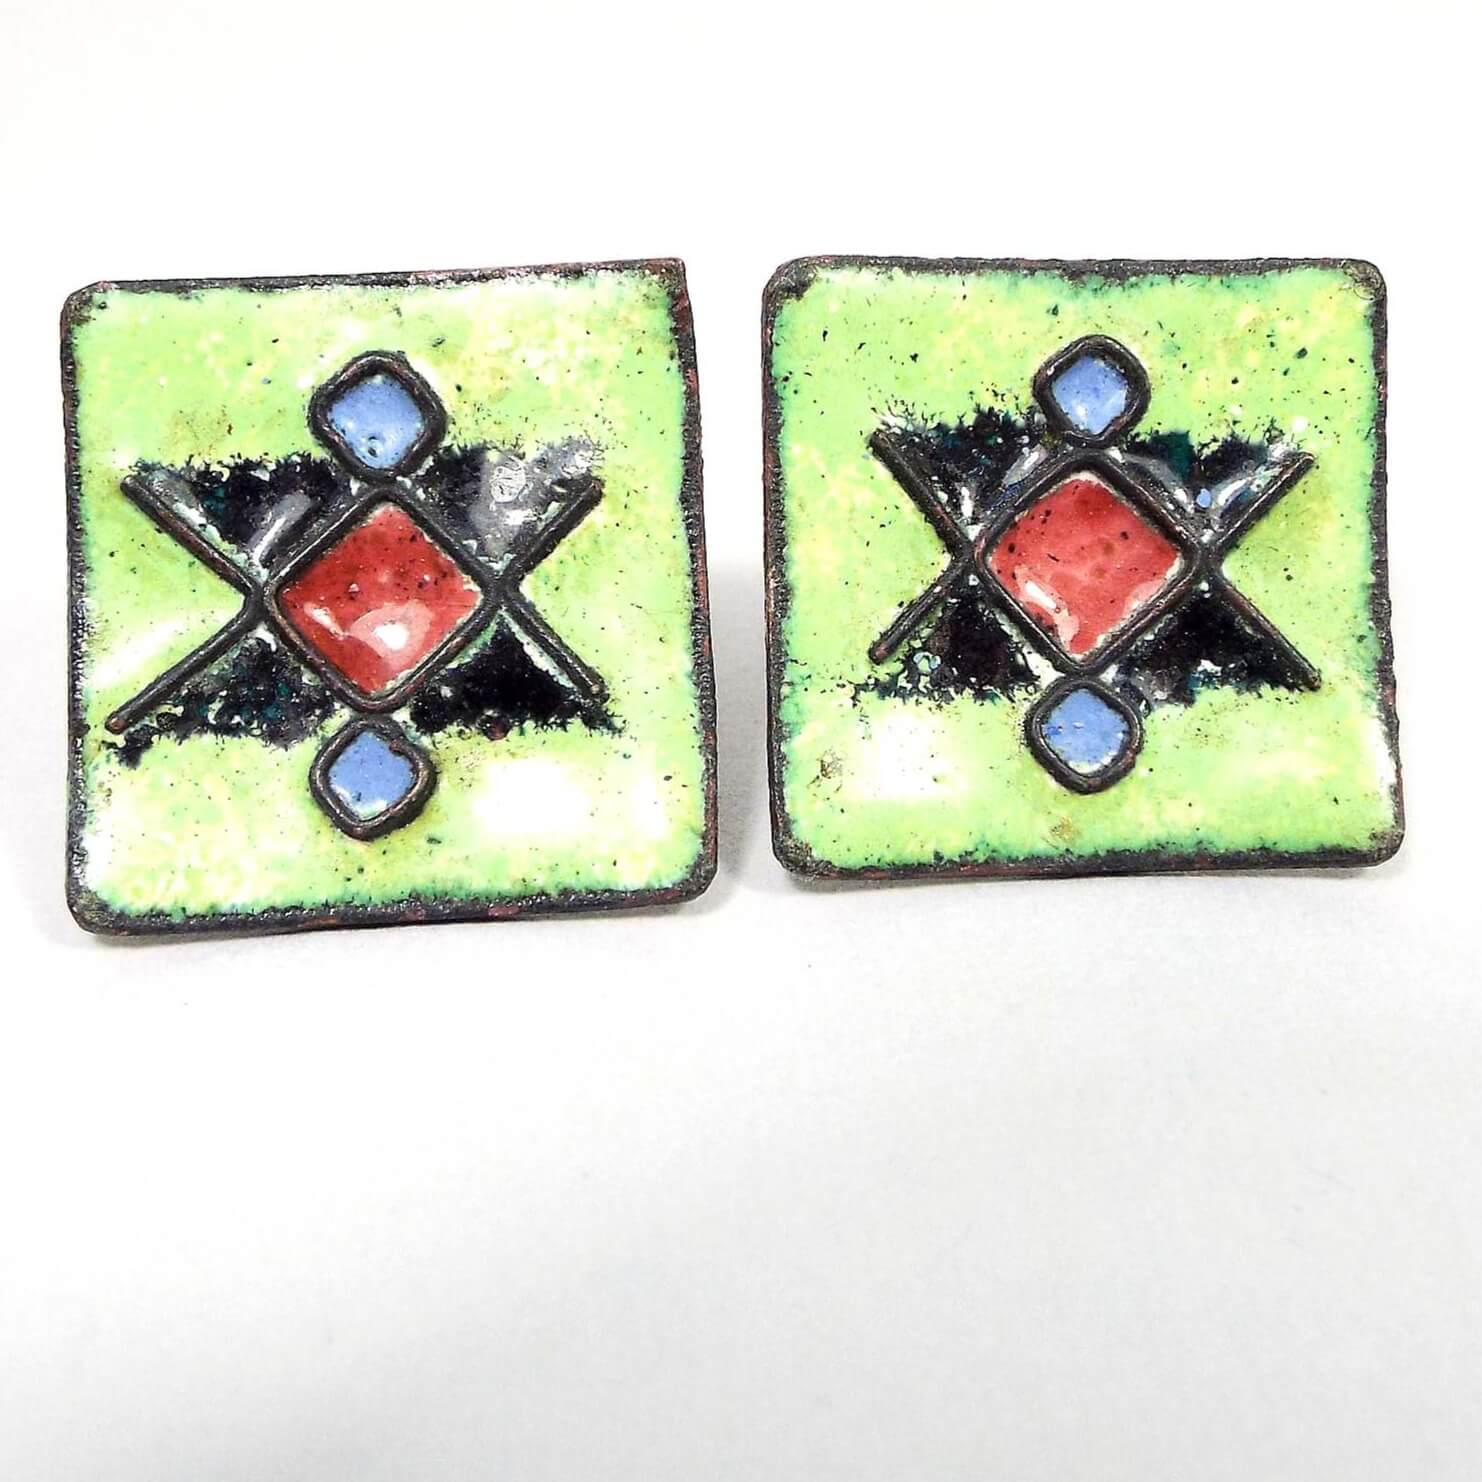 Front view of the retro vintage enameled cufflinks. The are curved squares with a red, black, and blue diamond like pattern on a bright green enamel background.